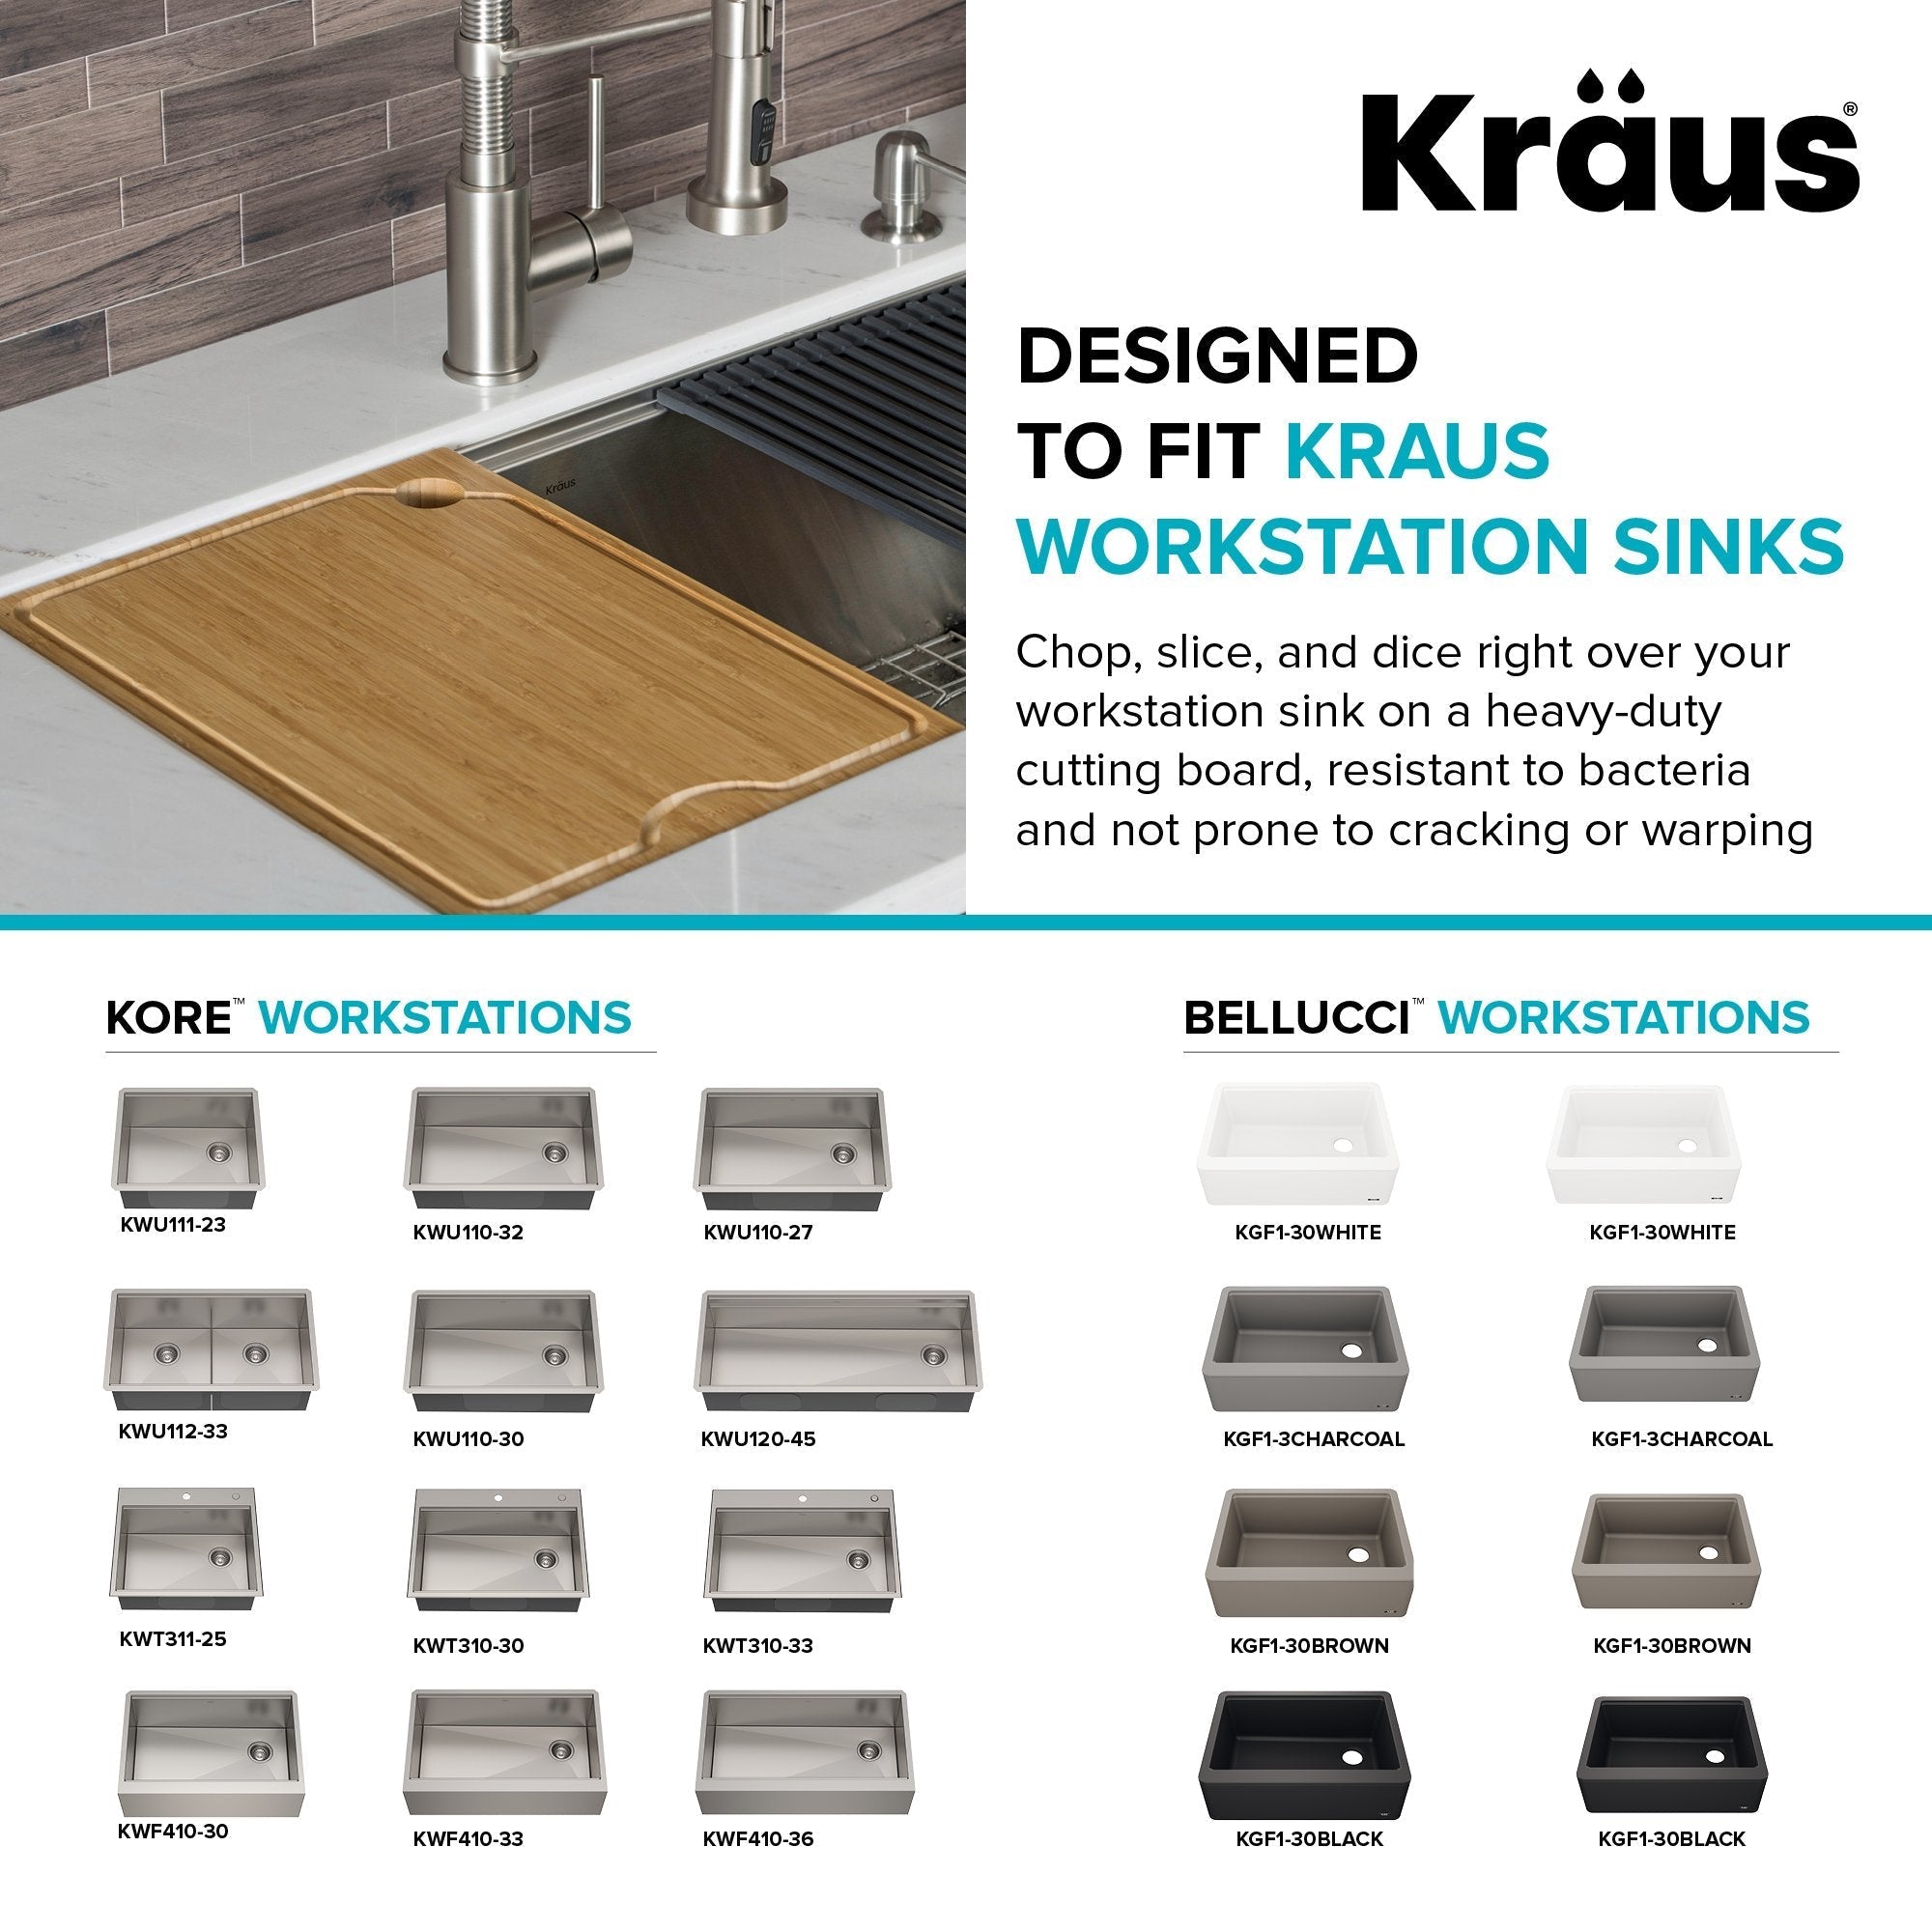 KRAUS Solid Bamboo Cutting Board with Mobile Device Holder for